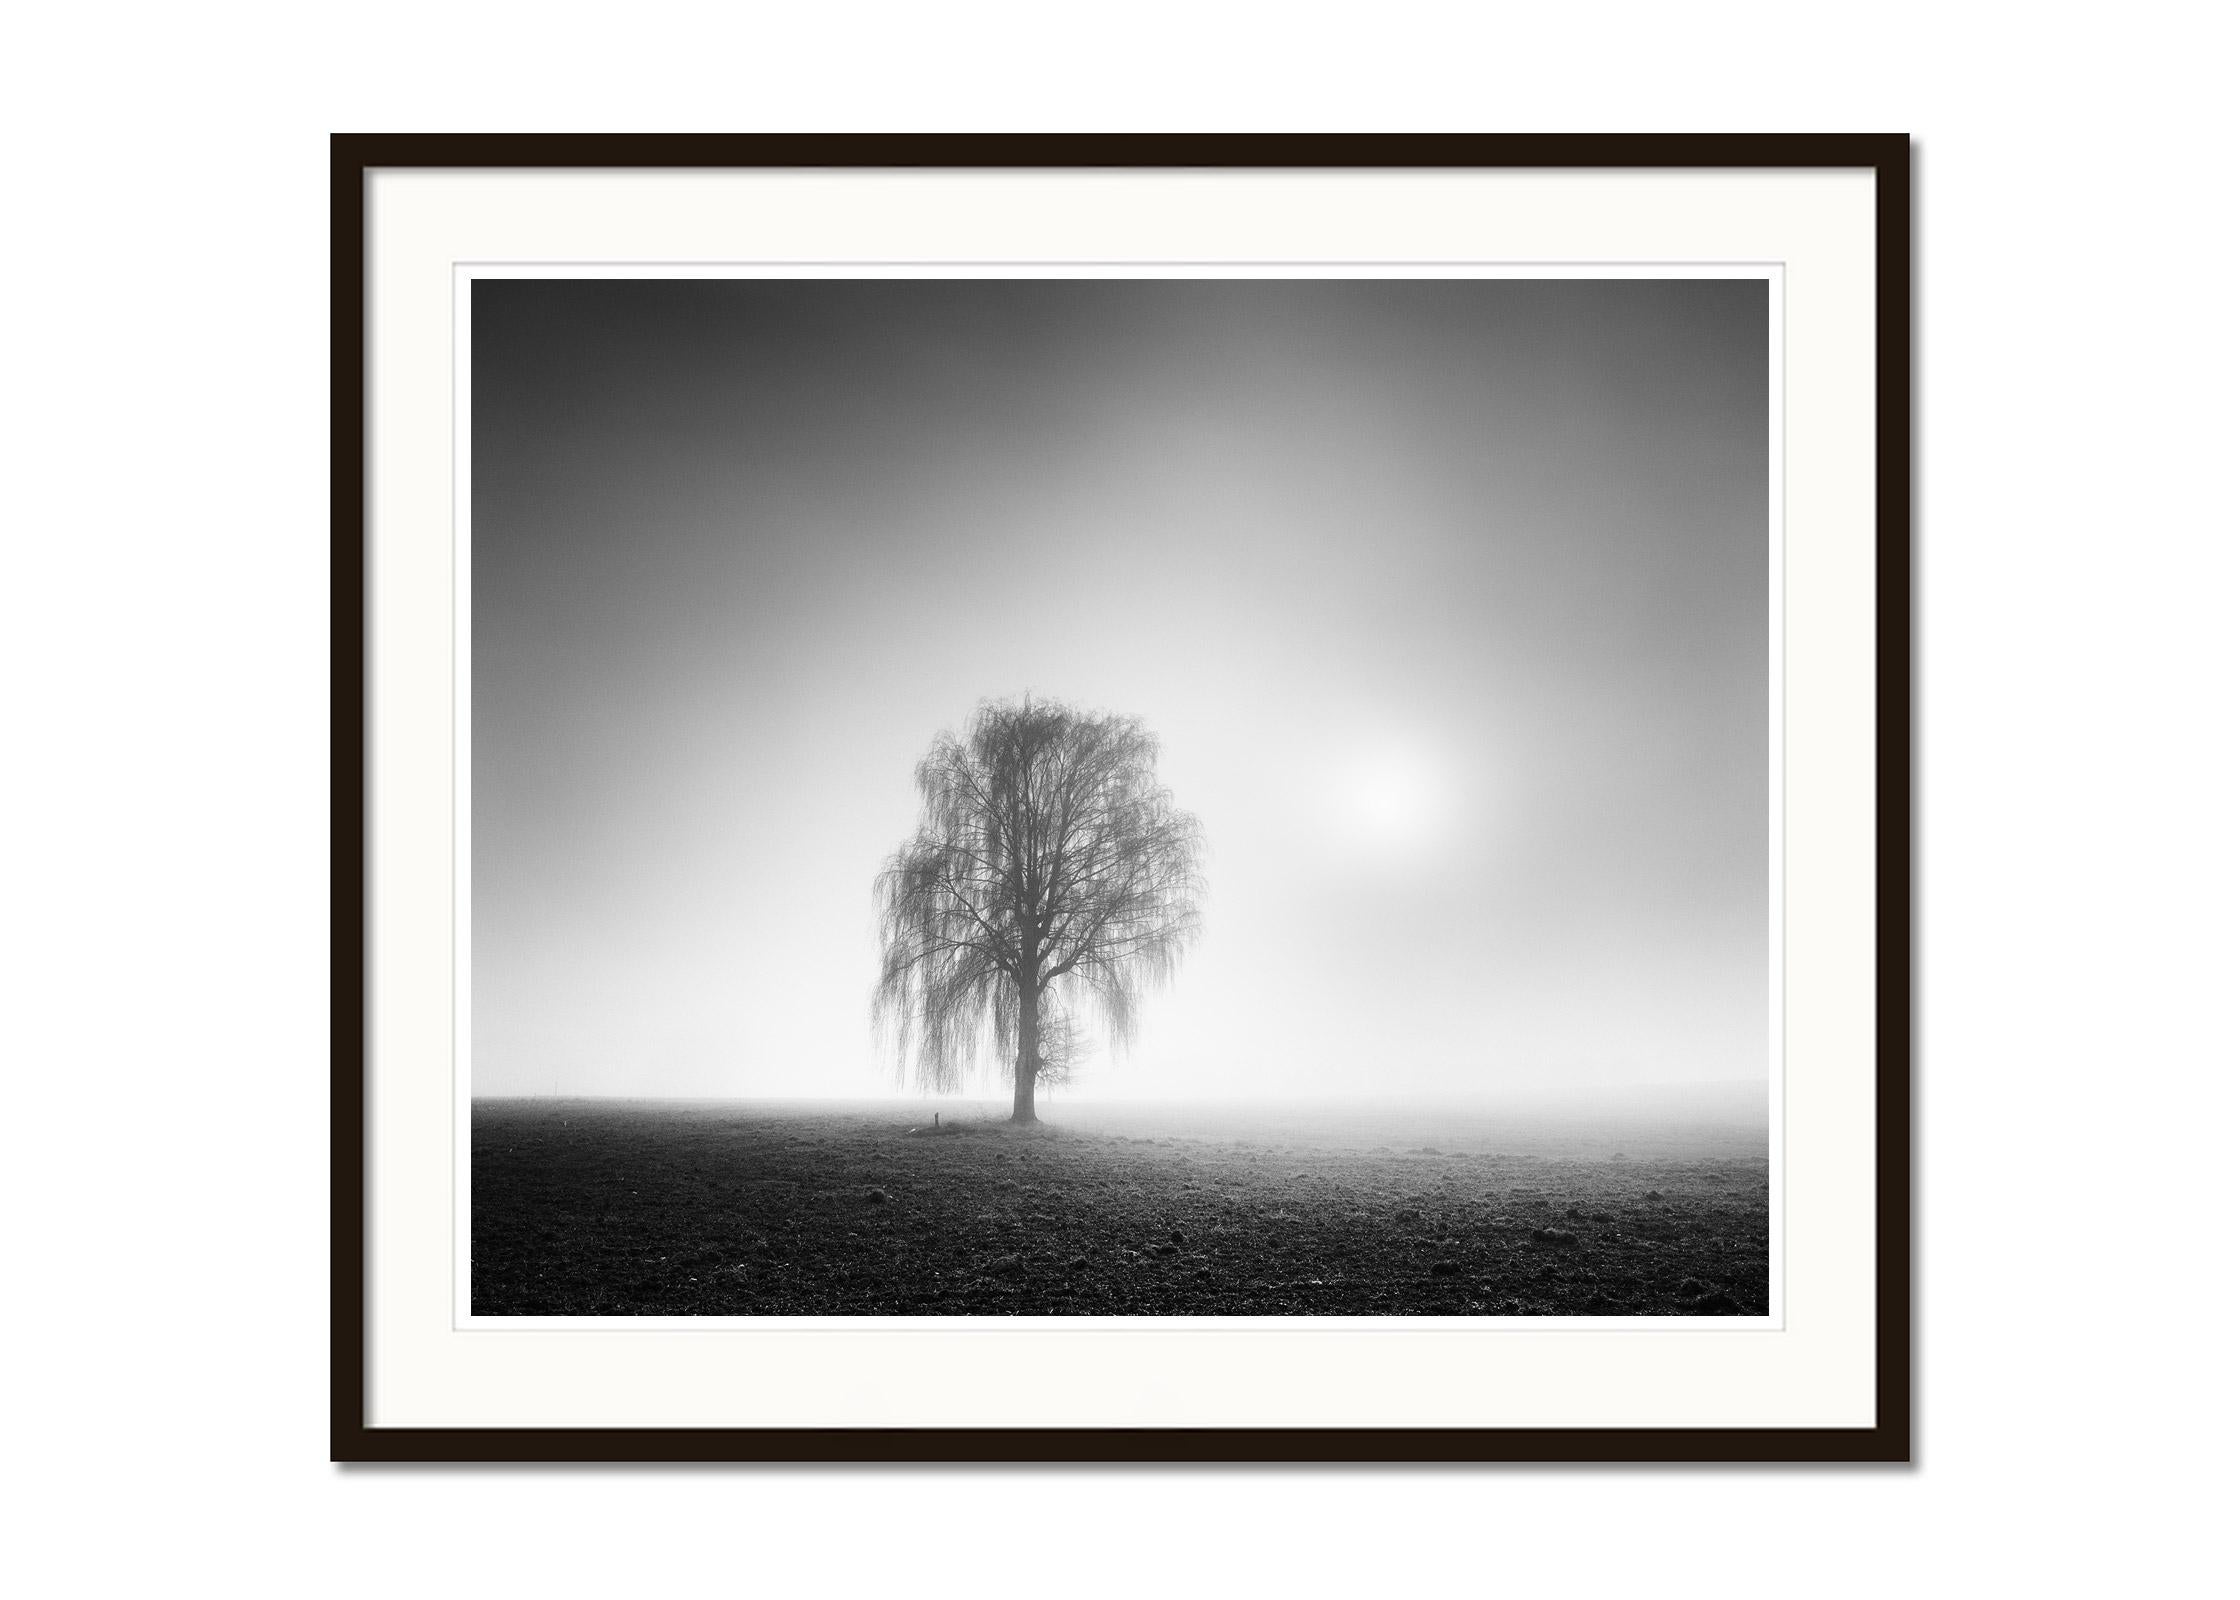 Foggy Morning, single Tree, Austria,  black and white landscape art photography - Contemporary Photograph by Gerald Berghammer, Ina Forstinger